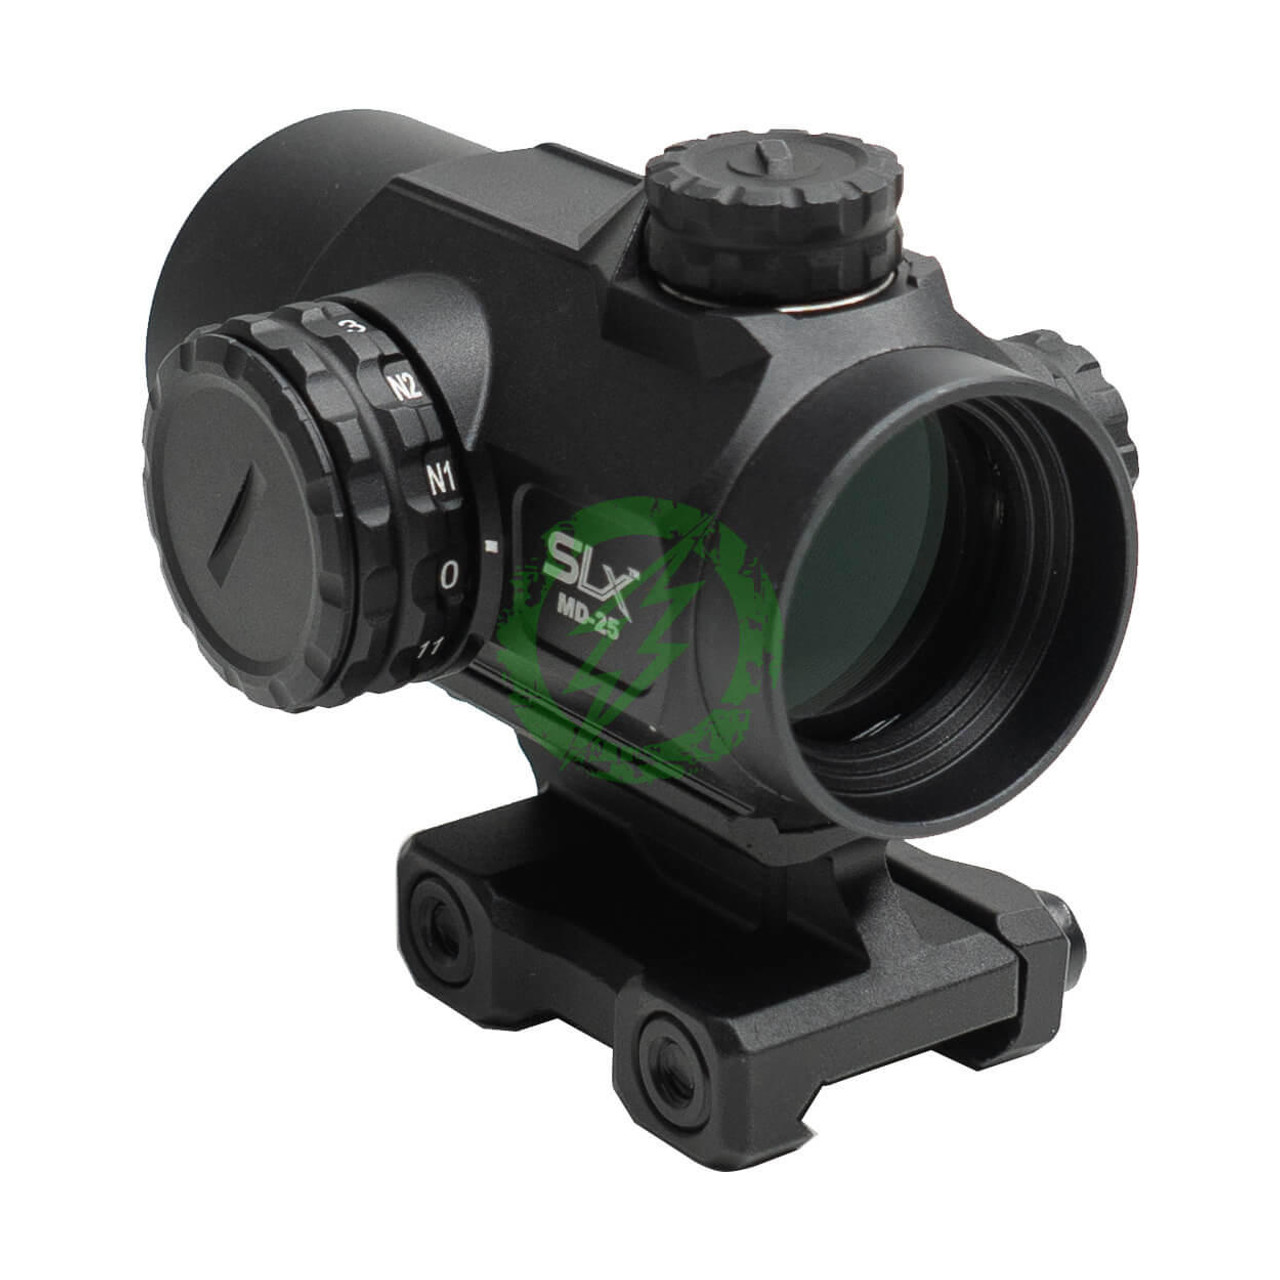  Primary Arms SLx MD-25 Rotary Knob 25mm Microdot Gen II with AutoLive 2 MOA Red Dot Reticle 